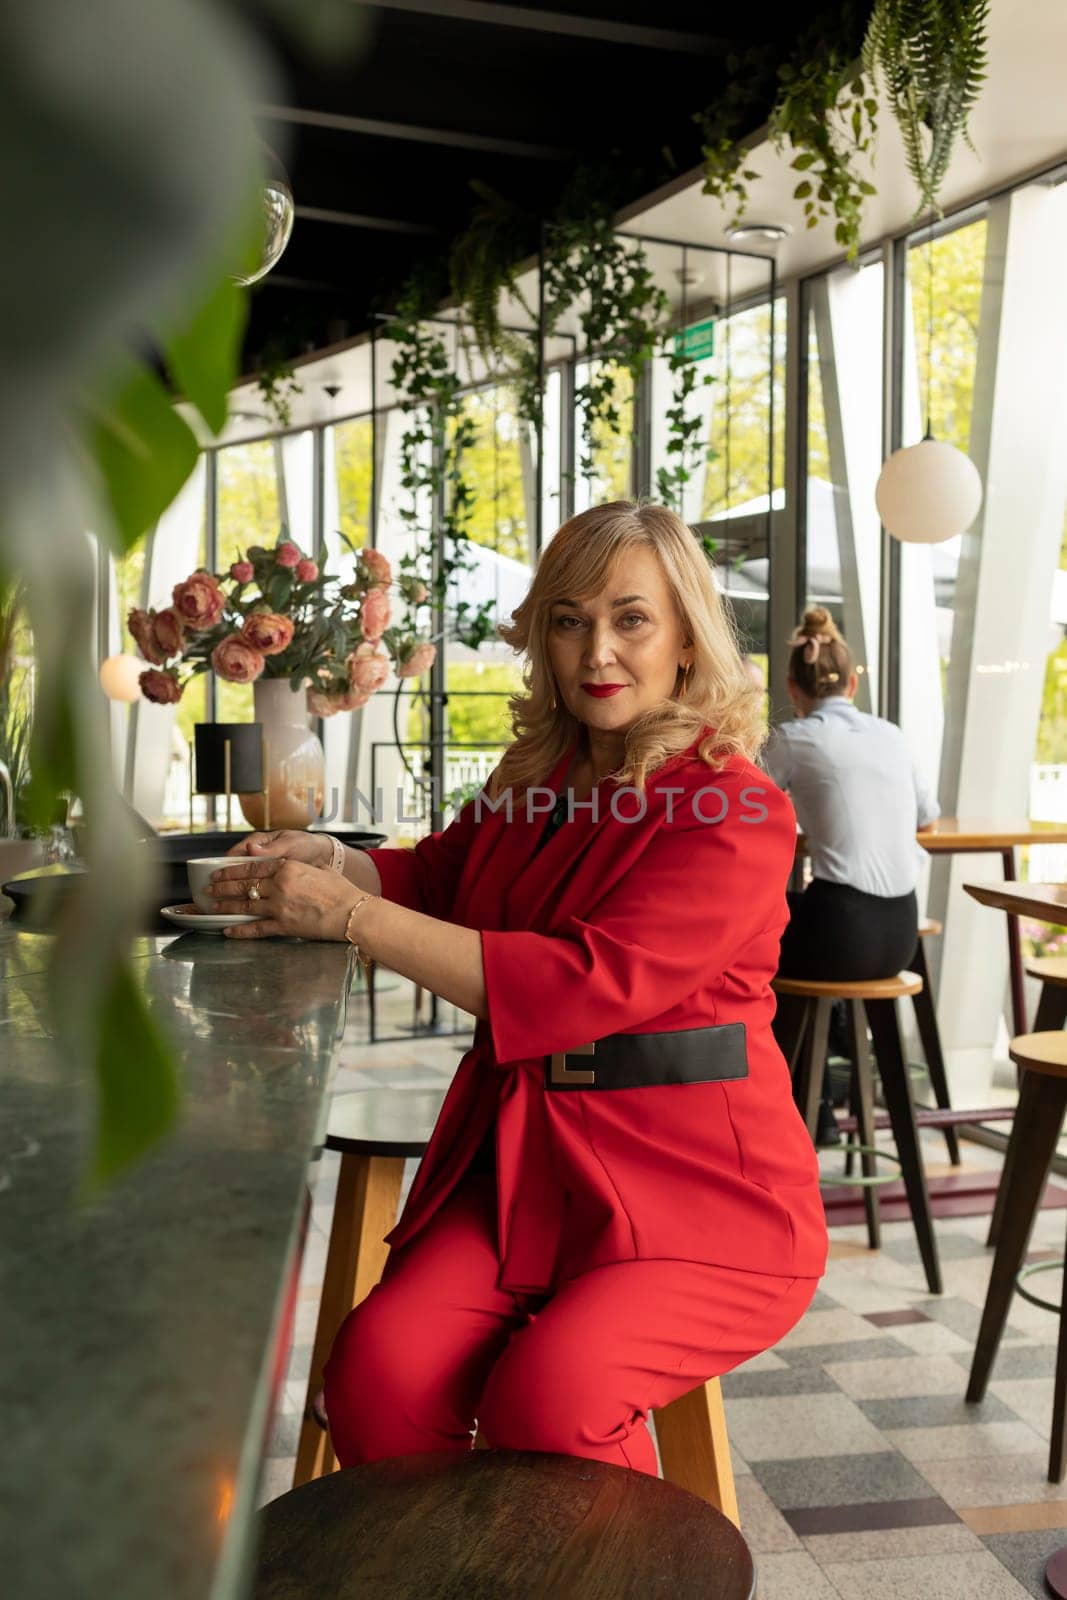 Beautiful Blonde Mature Sexagenarian Woman Drinks Coffee, Tea at Cafe or Restaurant. Modern Senior Female in her 60s wears Red Fashionable Suit, Enjoys Her Life, Time. Happy Retirement. Vertical Plane